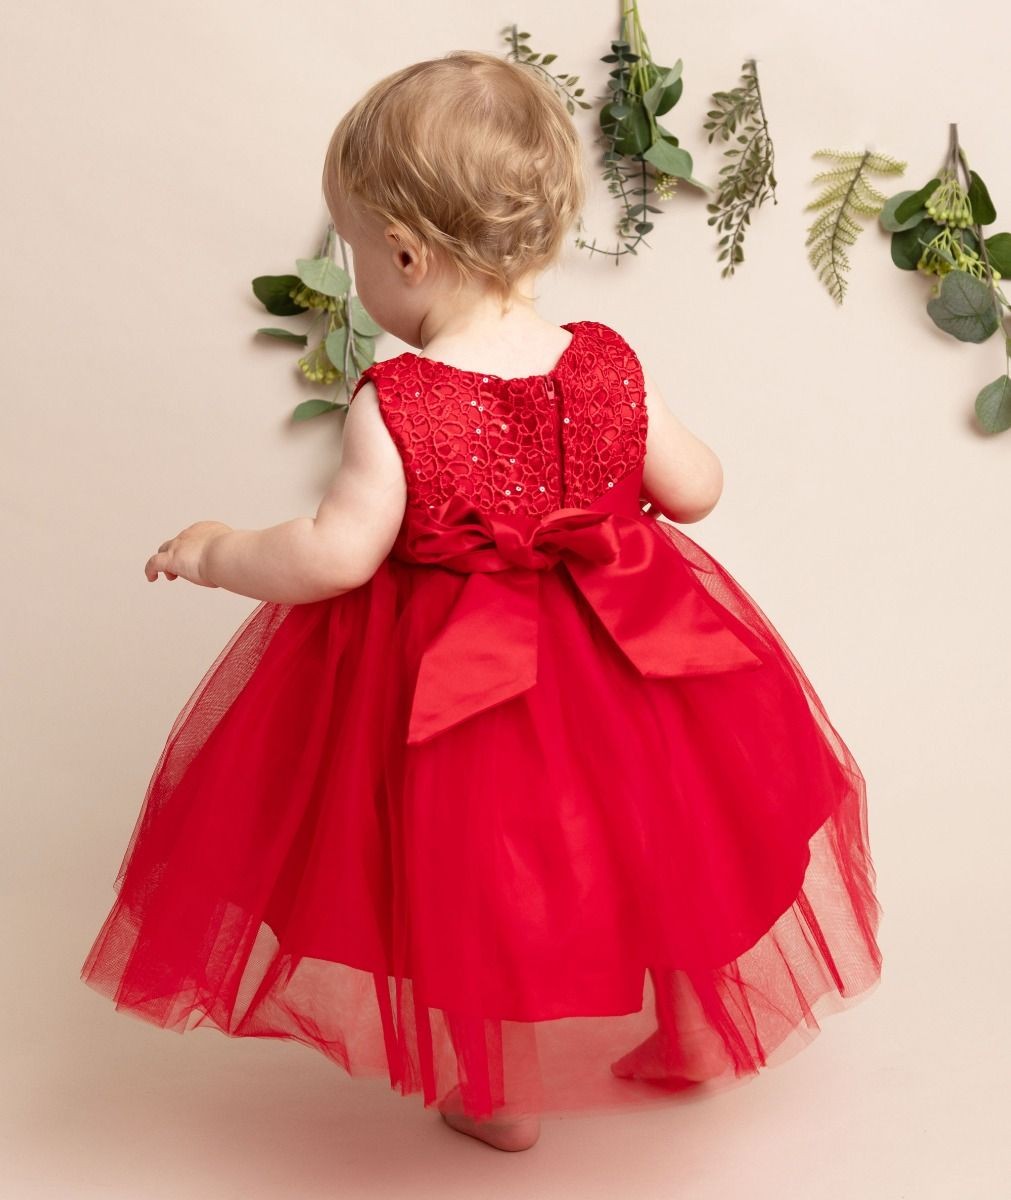 Baby Girls Dress with Floral Bodice & Bow - PC-1025 - Red